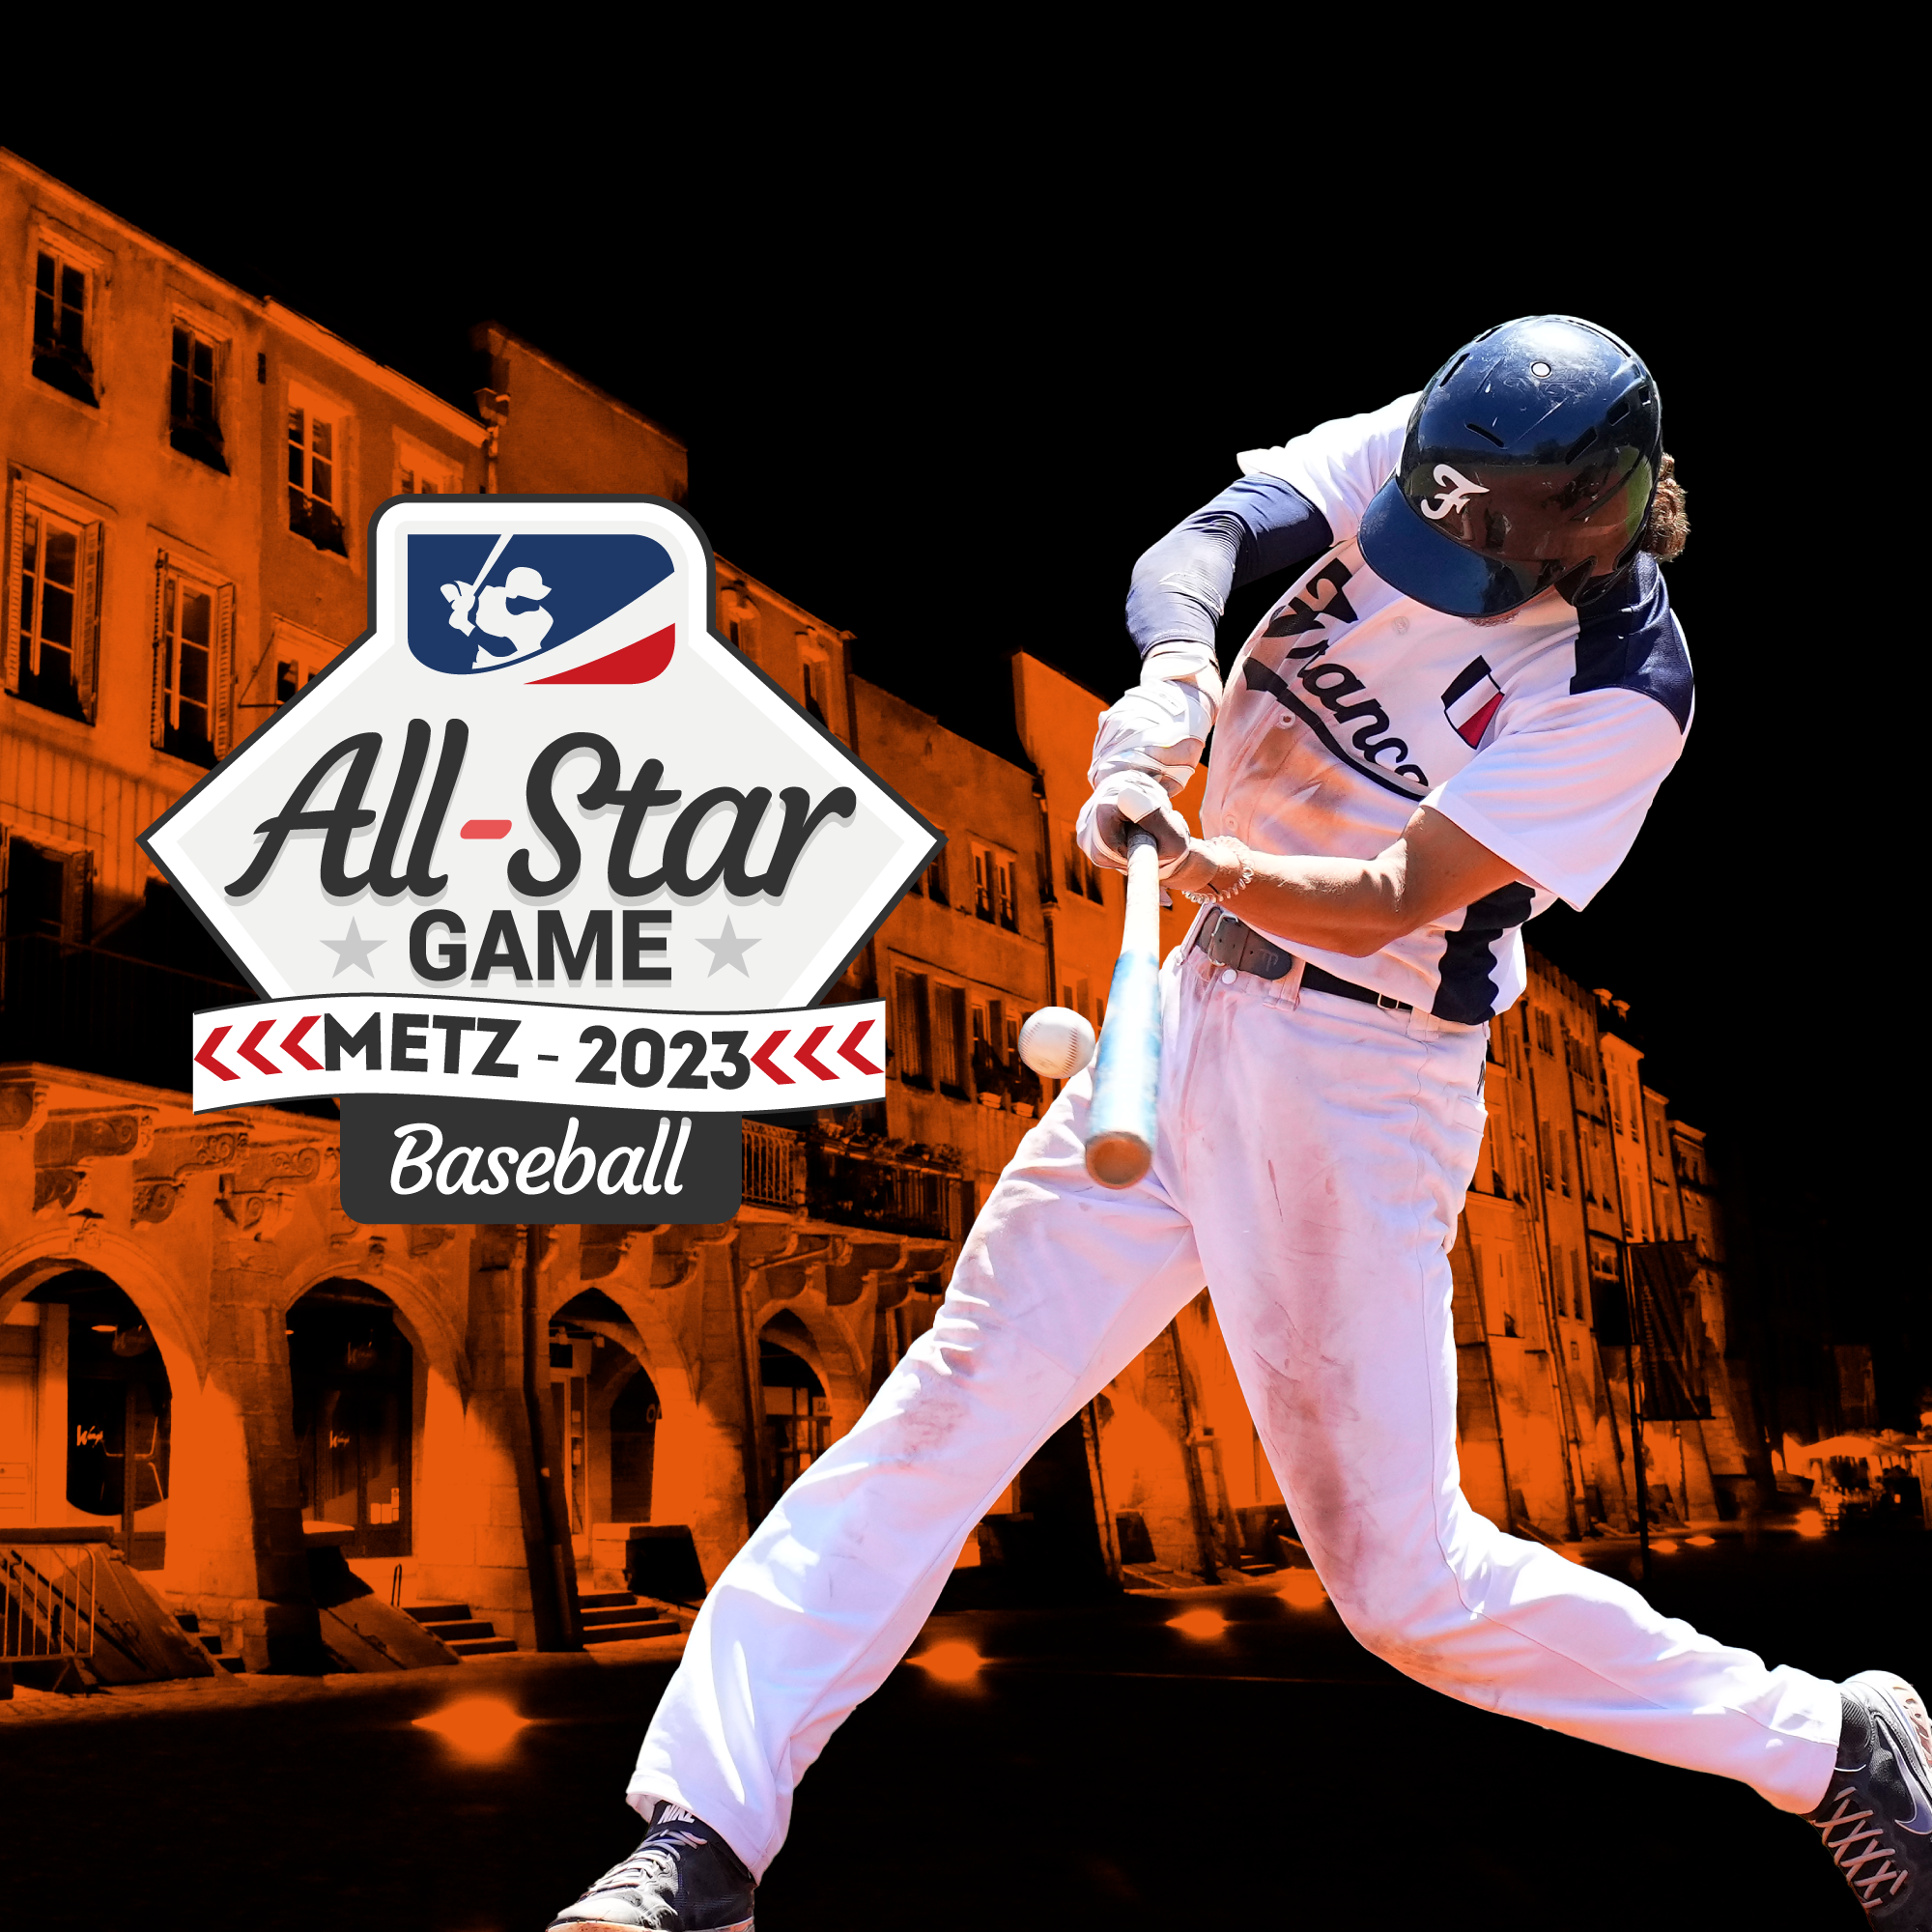 COMETZ ALL STAR GAME POSTER